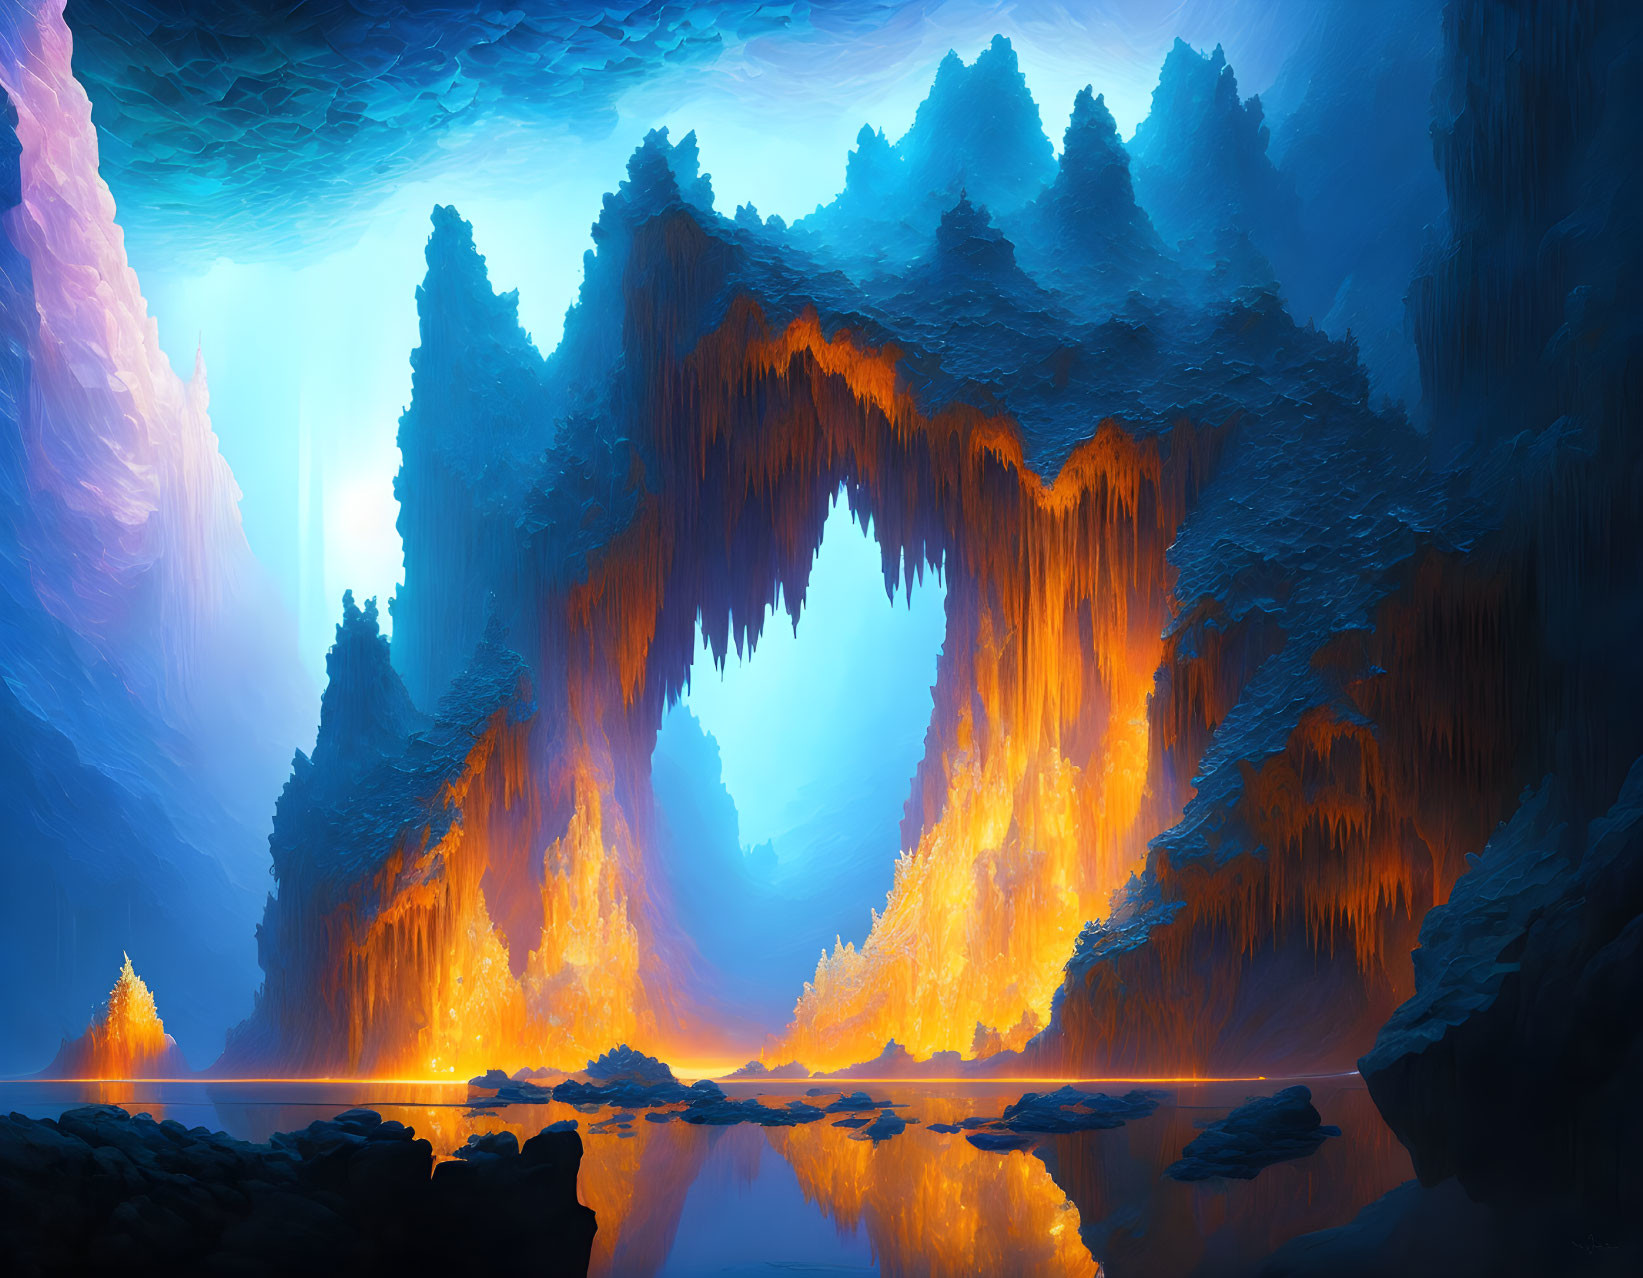 Surreal cave digital artwork with blue and orange hues and a solitary tree